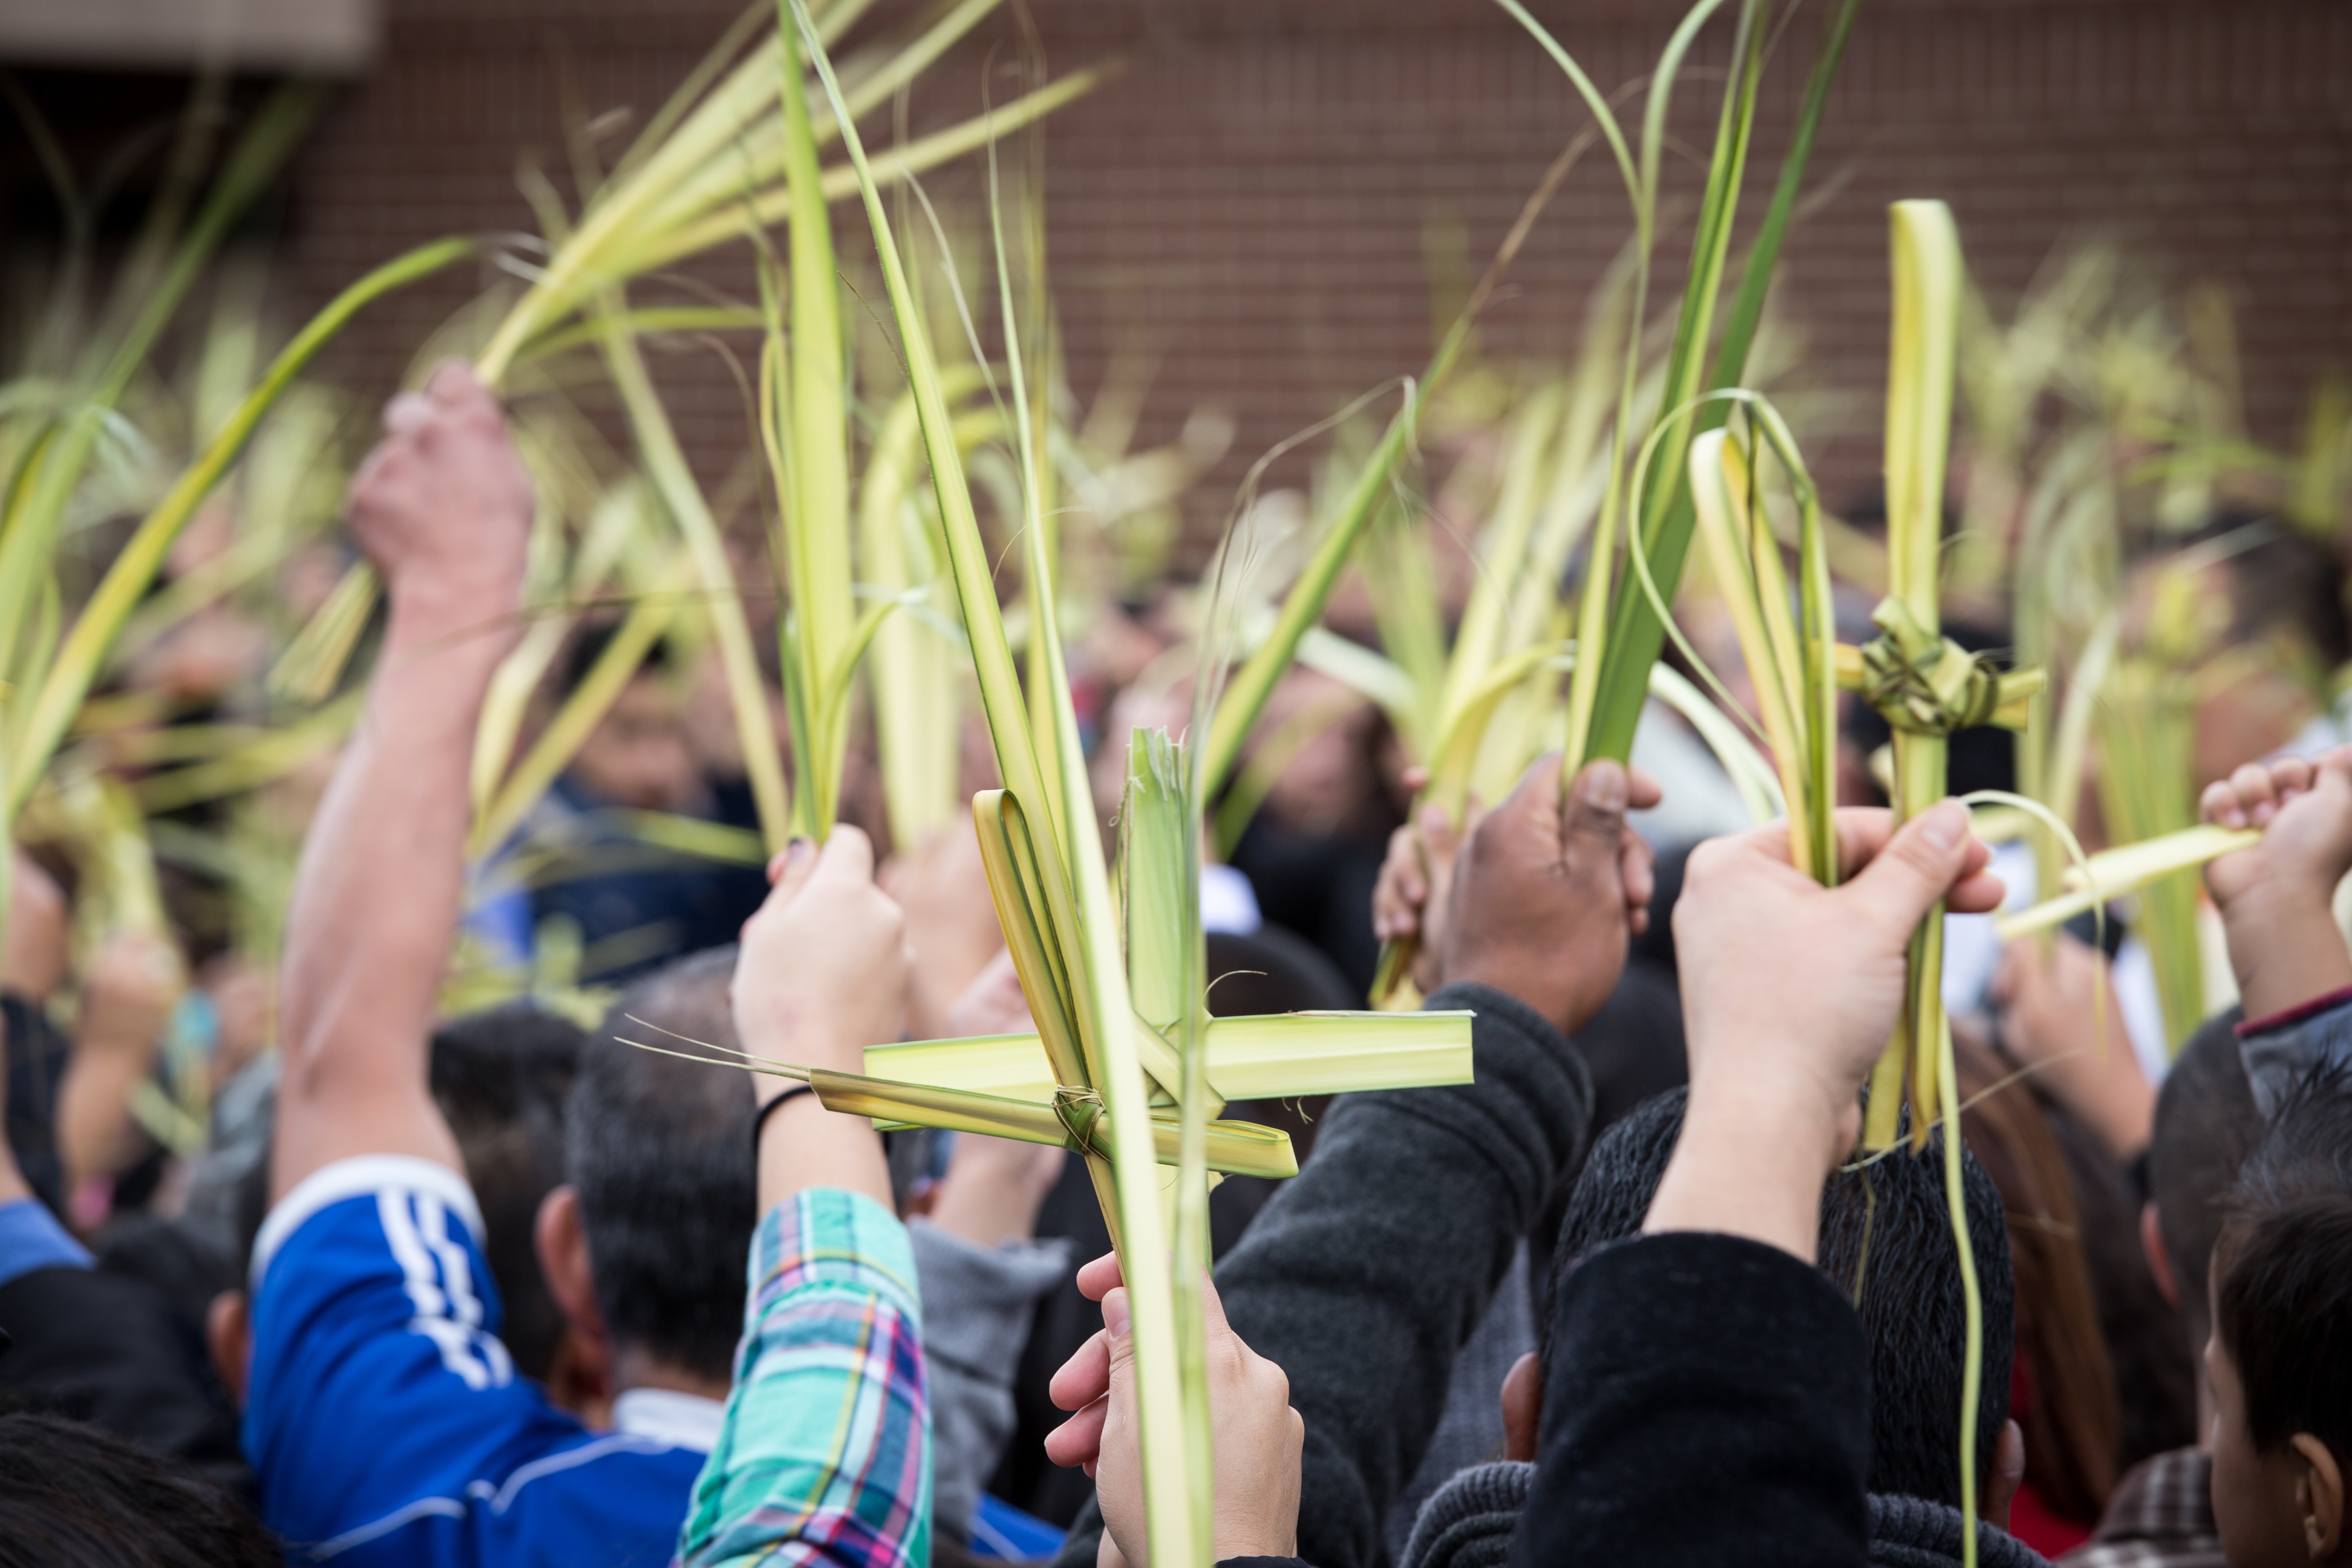 25 things for your kids to spot during Palm Sunday and Triduum